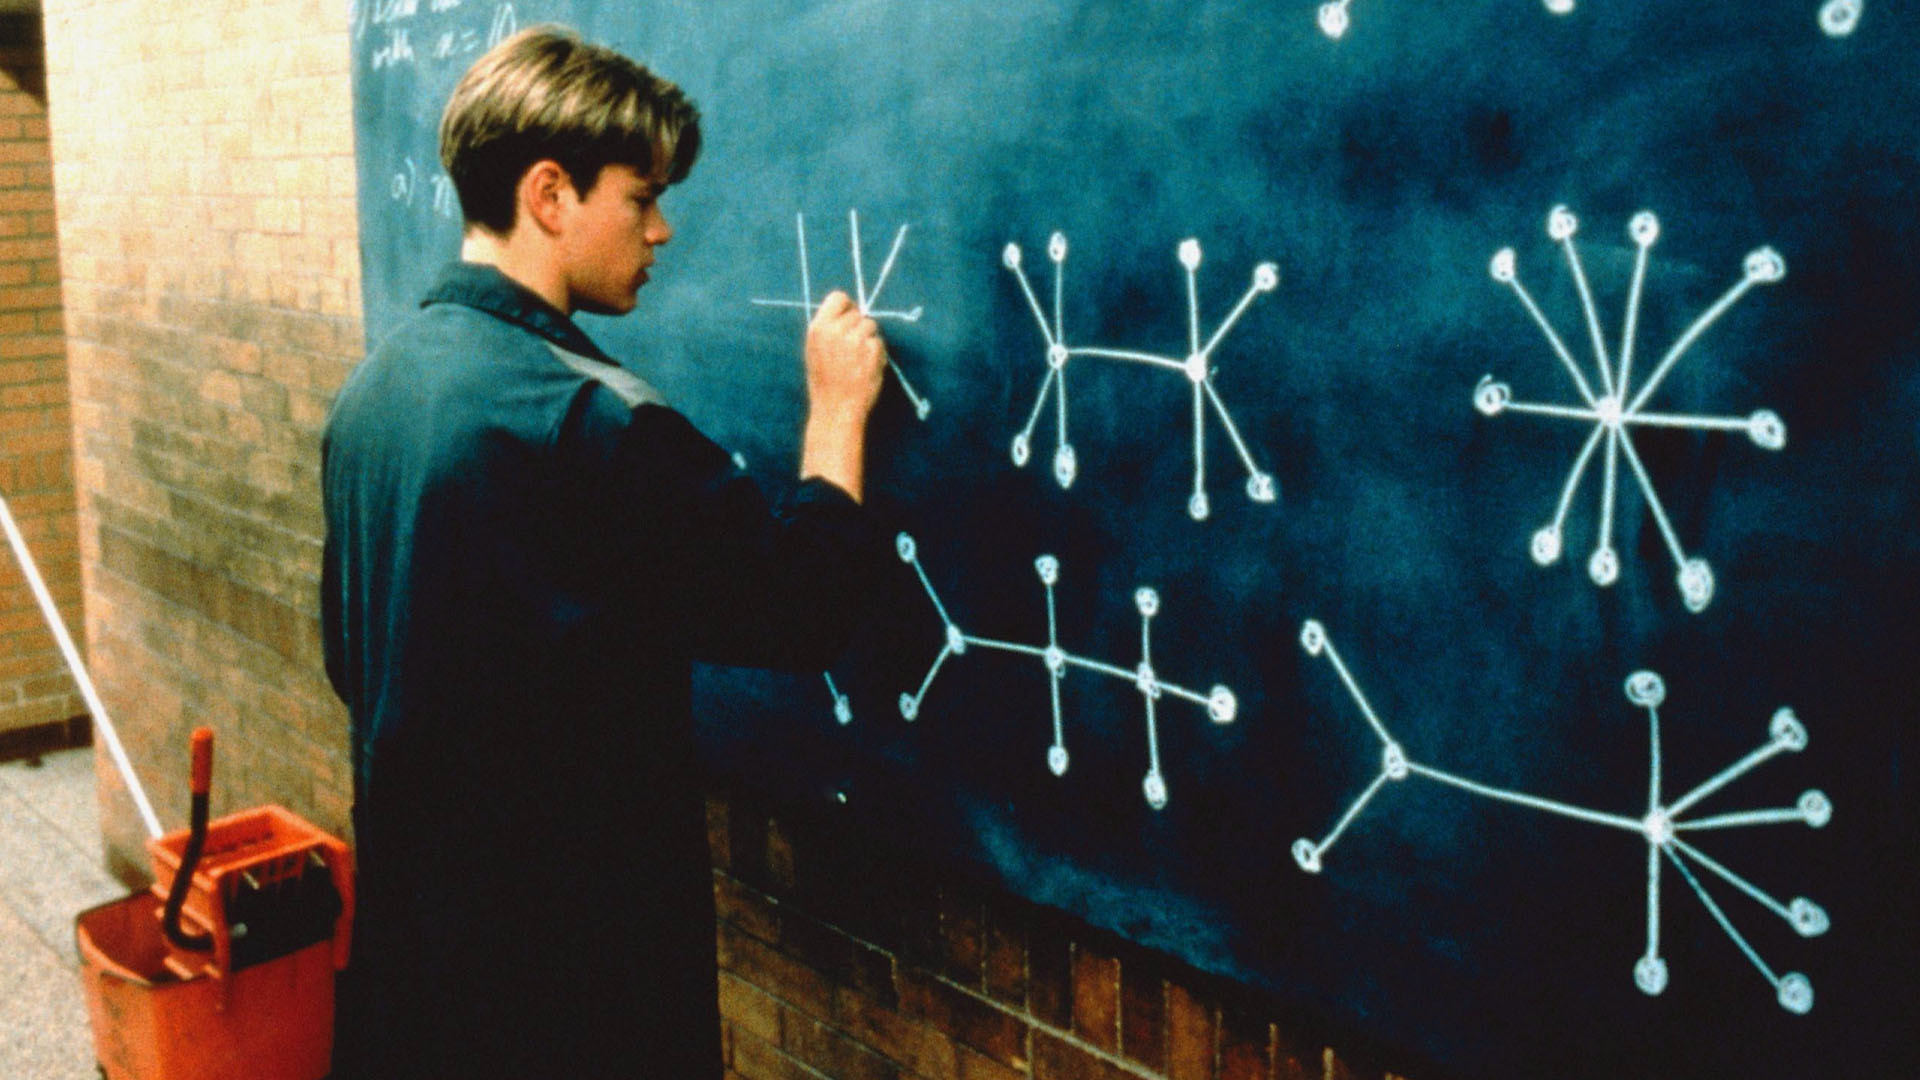 Source: Good Will Hunting